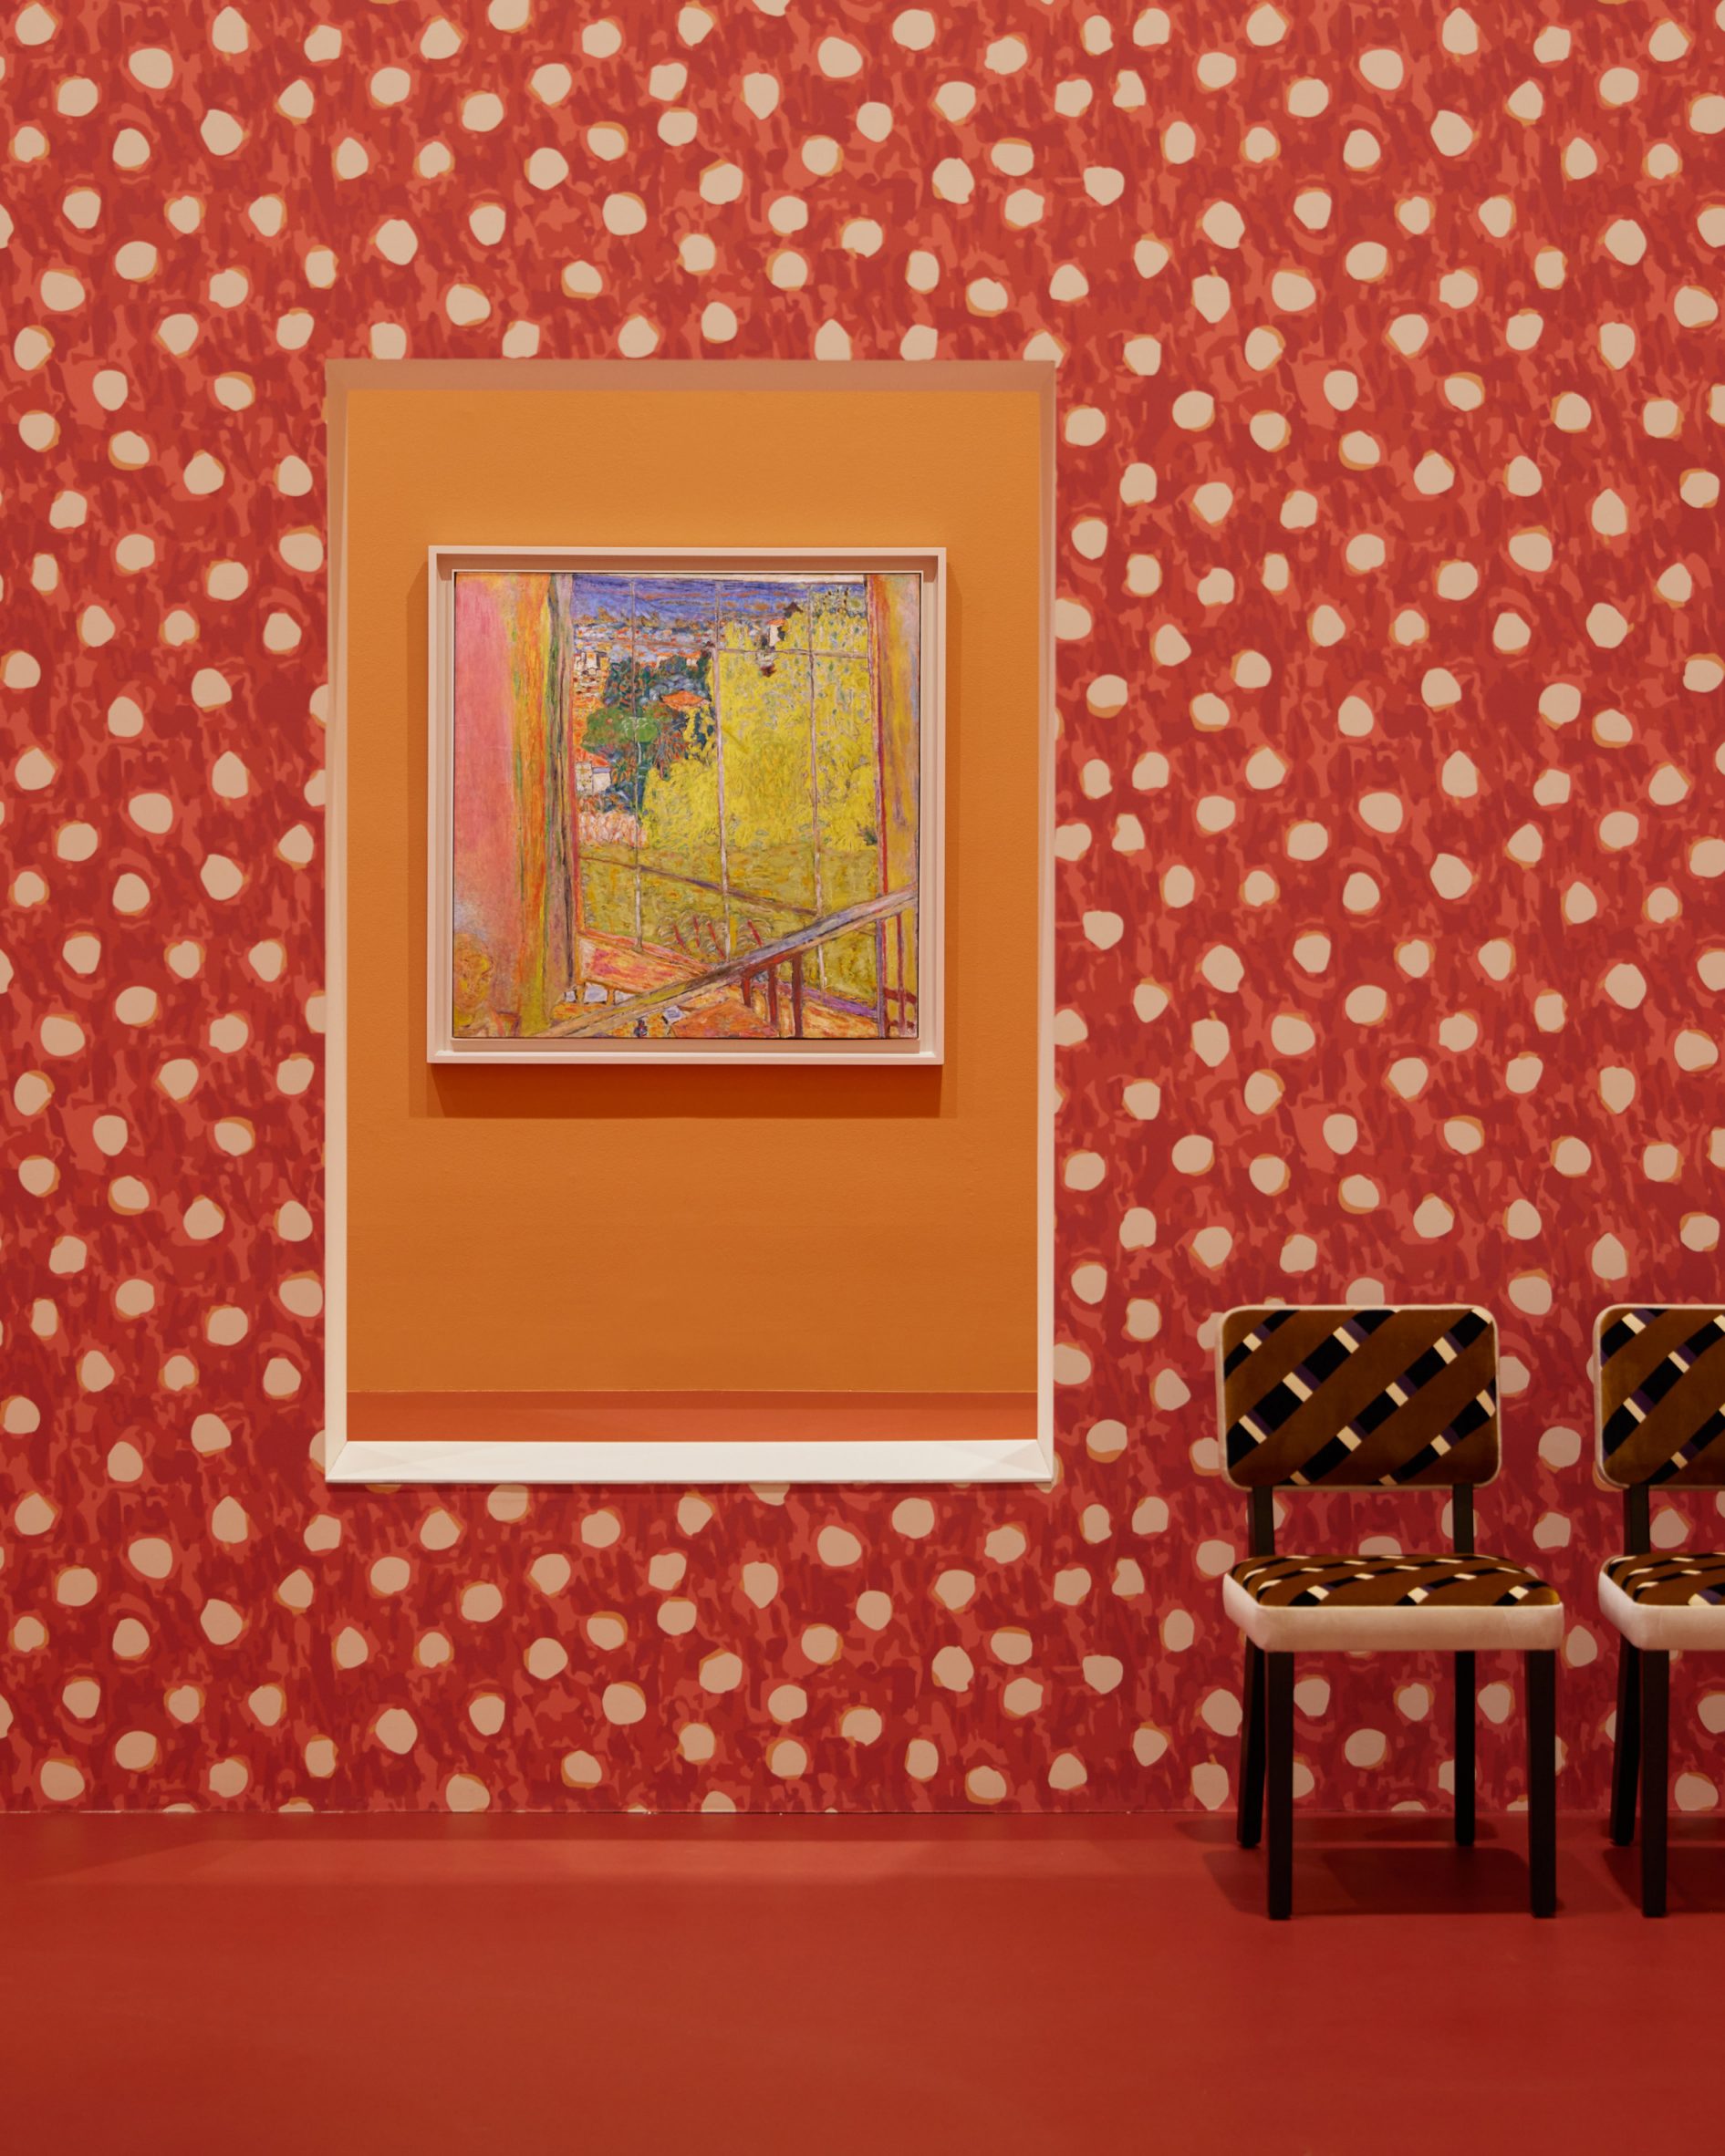 Red wall with white spots frames a painting through an opening